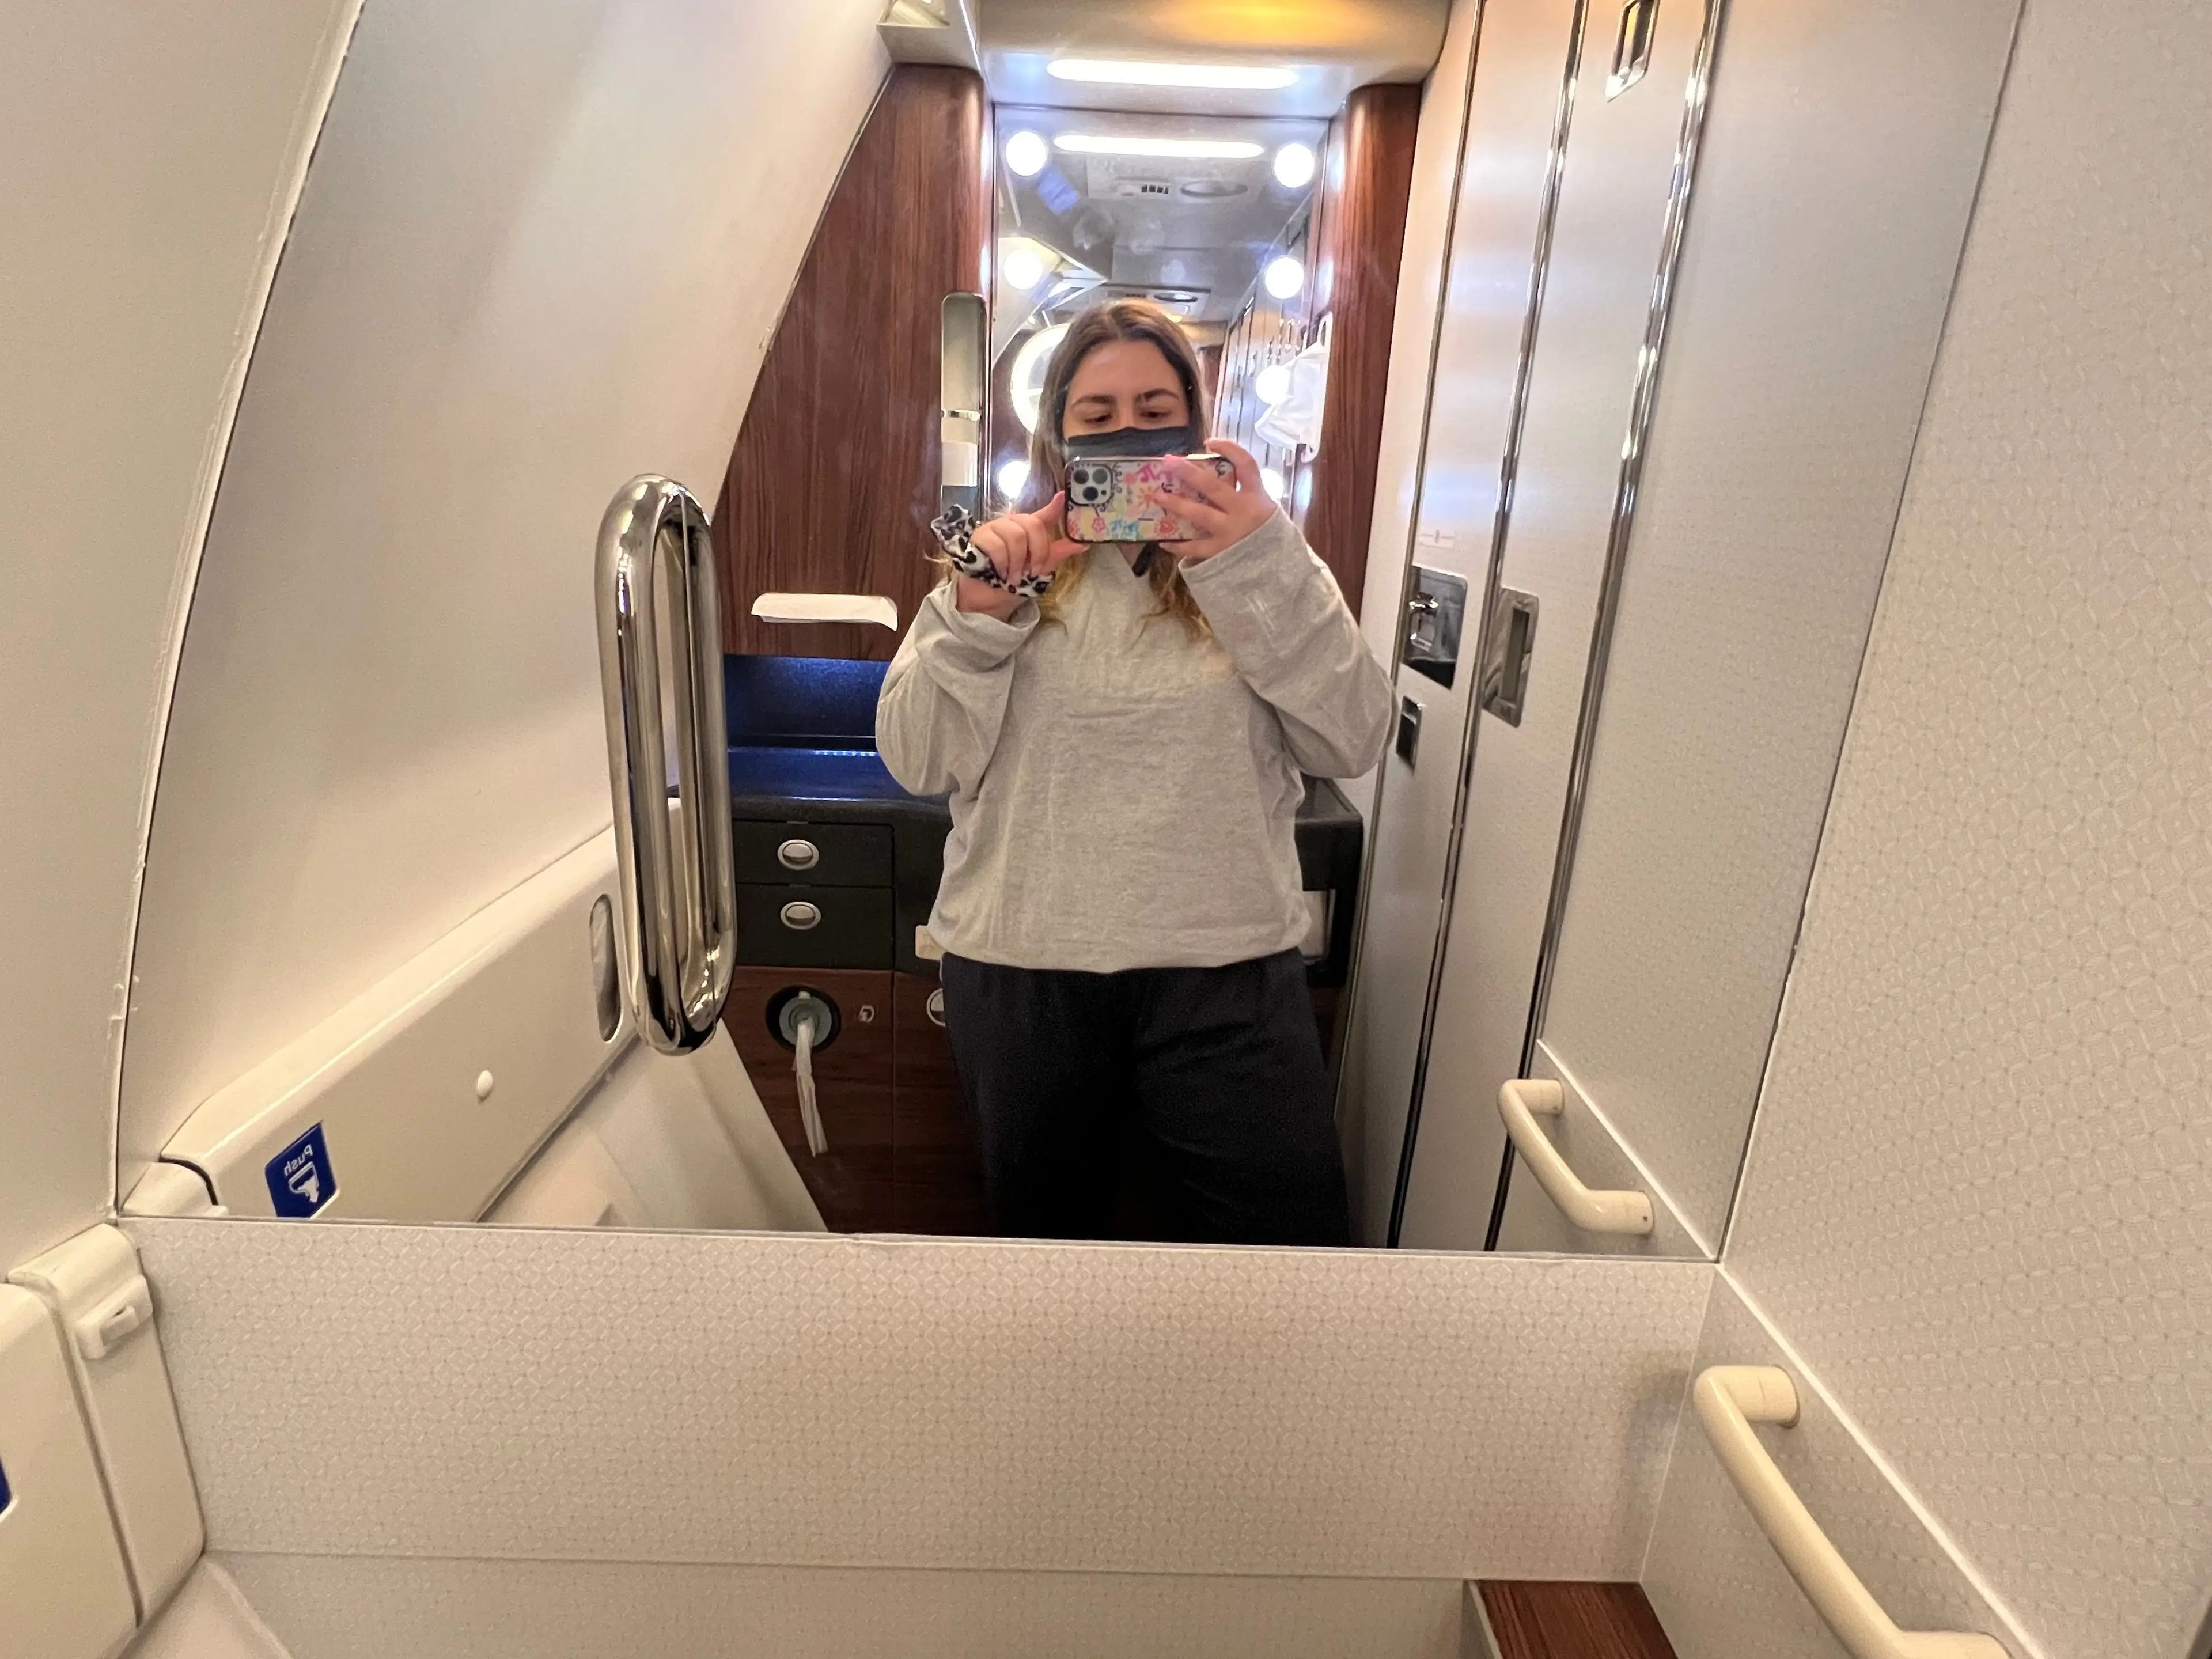 The bathroom on the plane was easily double the size of economy.